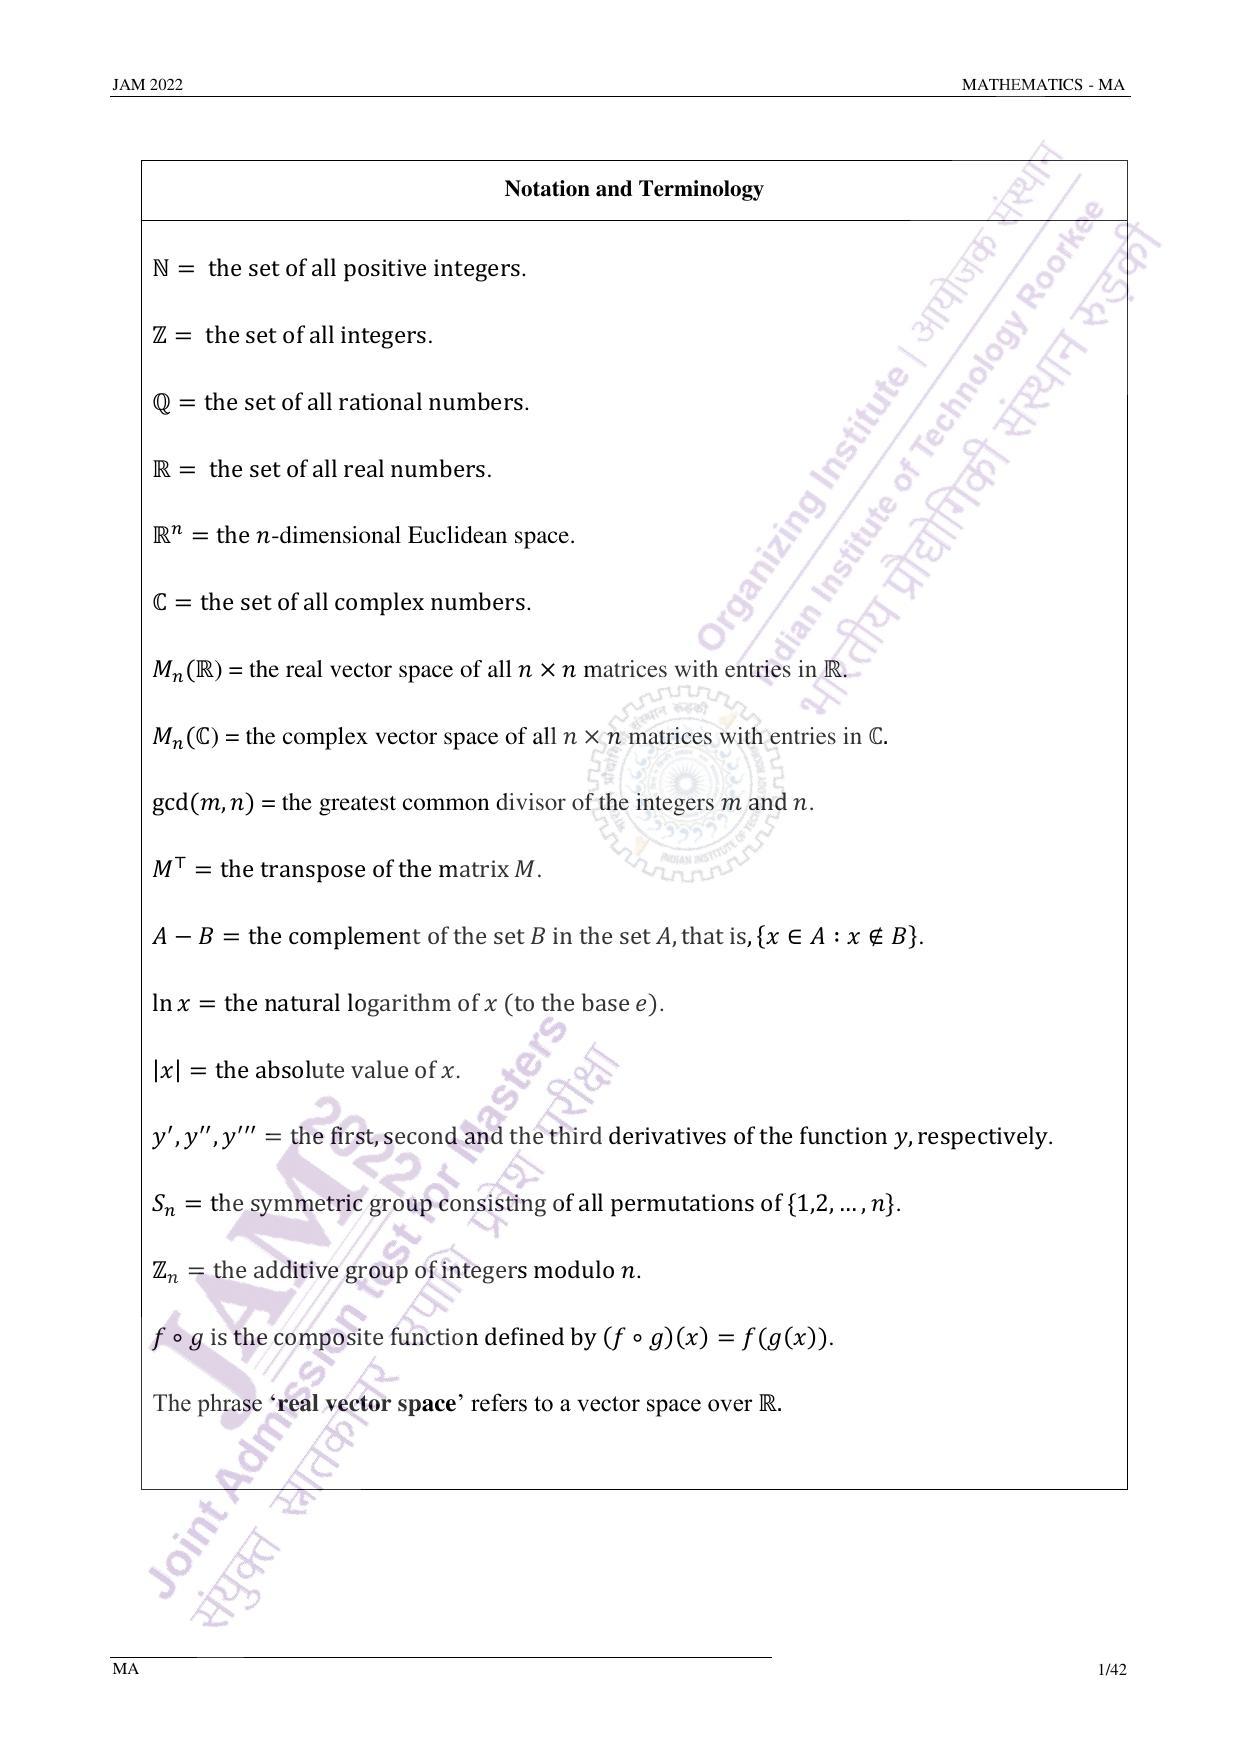 JAM 2022: MA Question Paper - Page 1